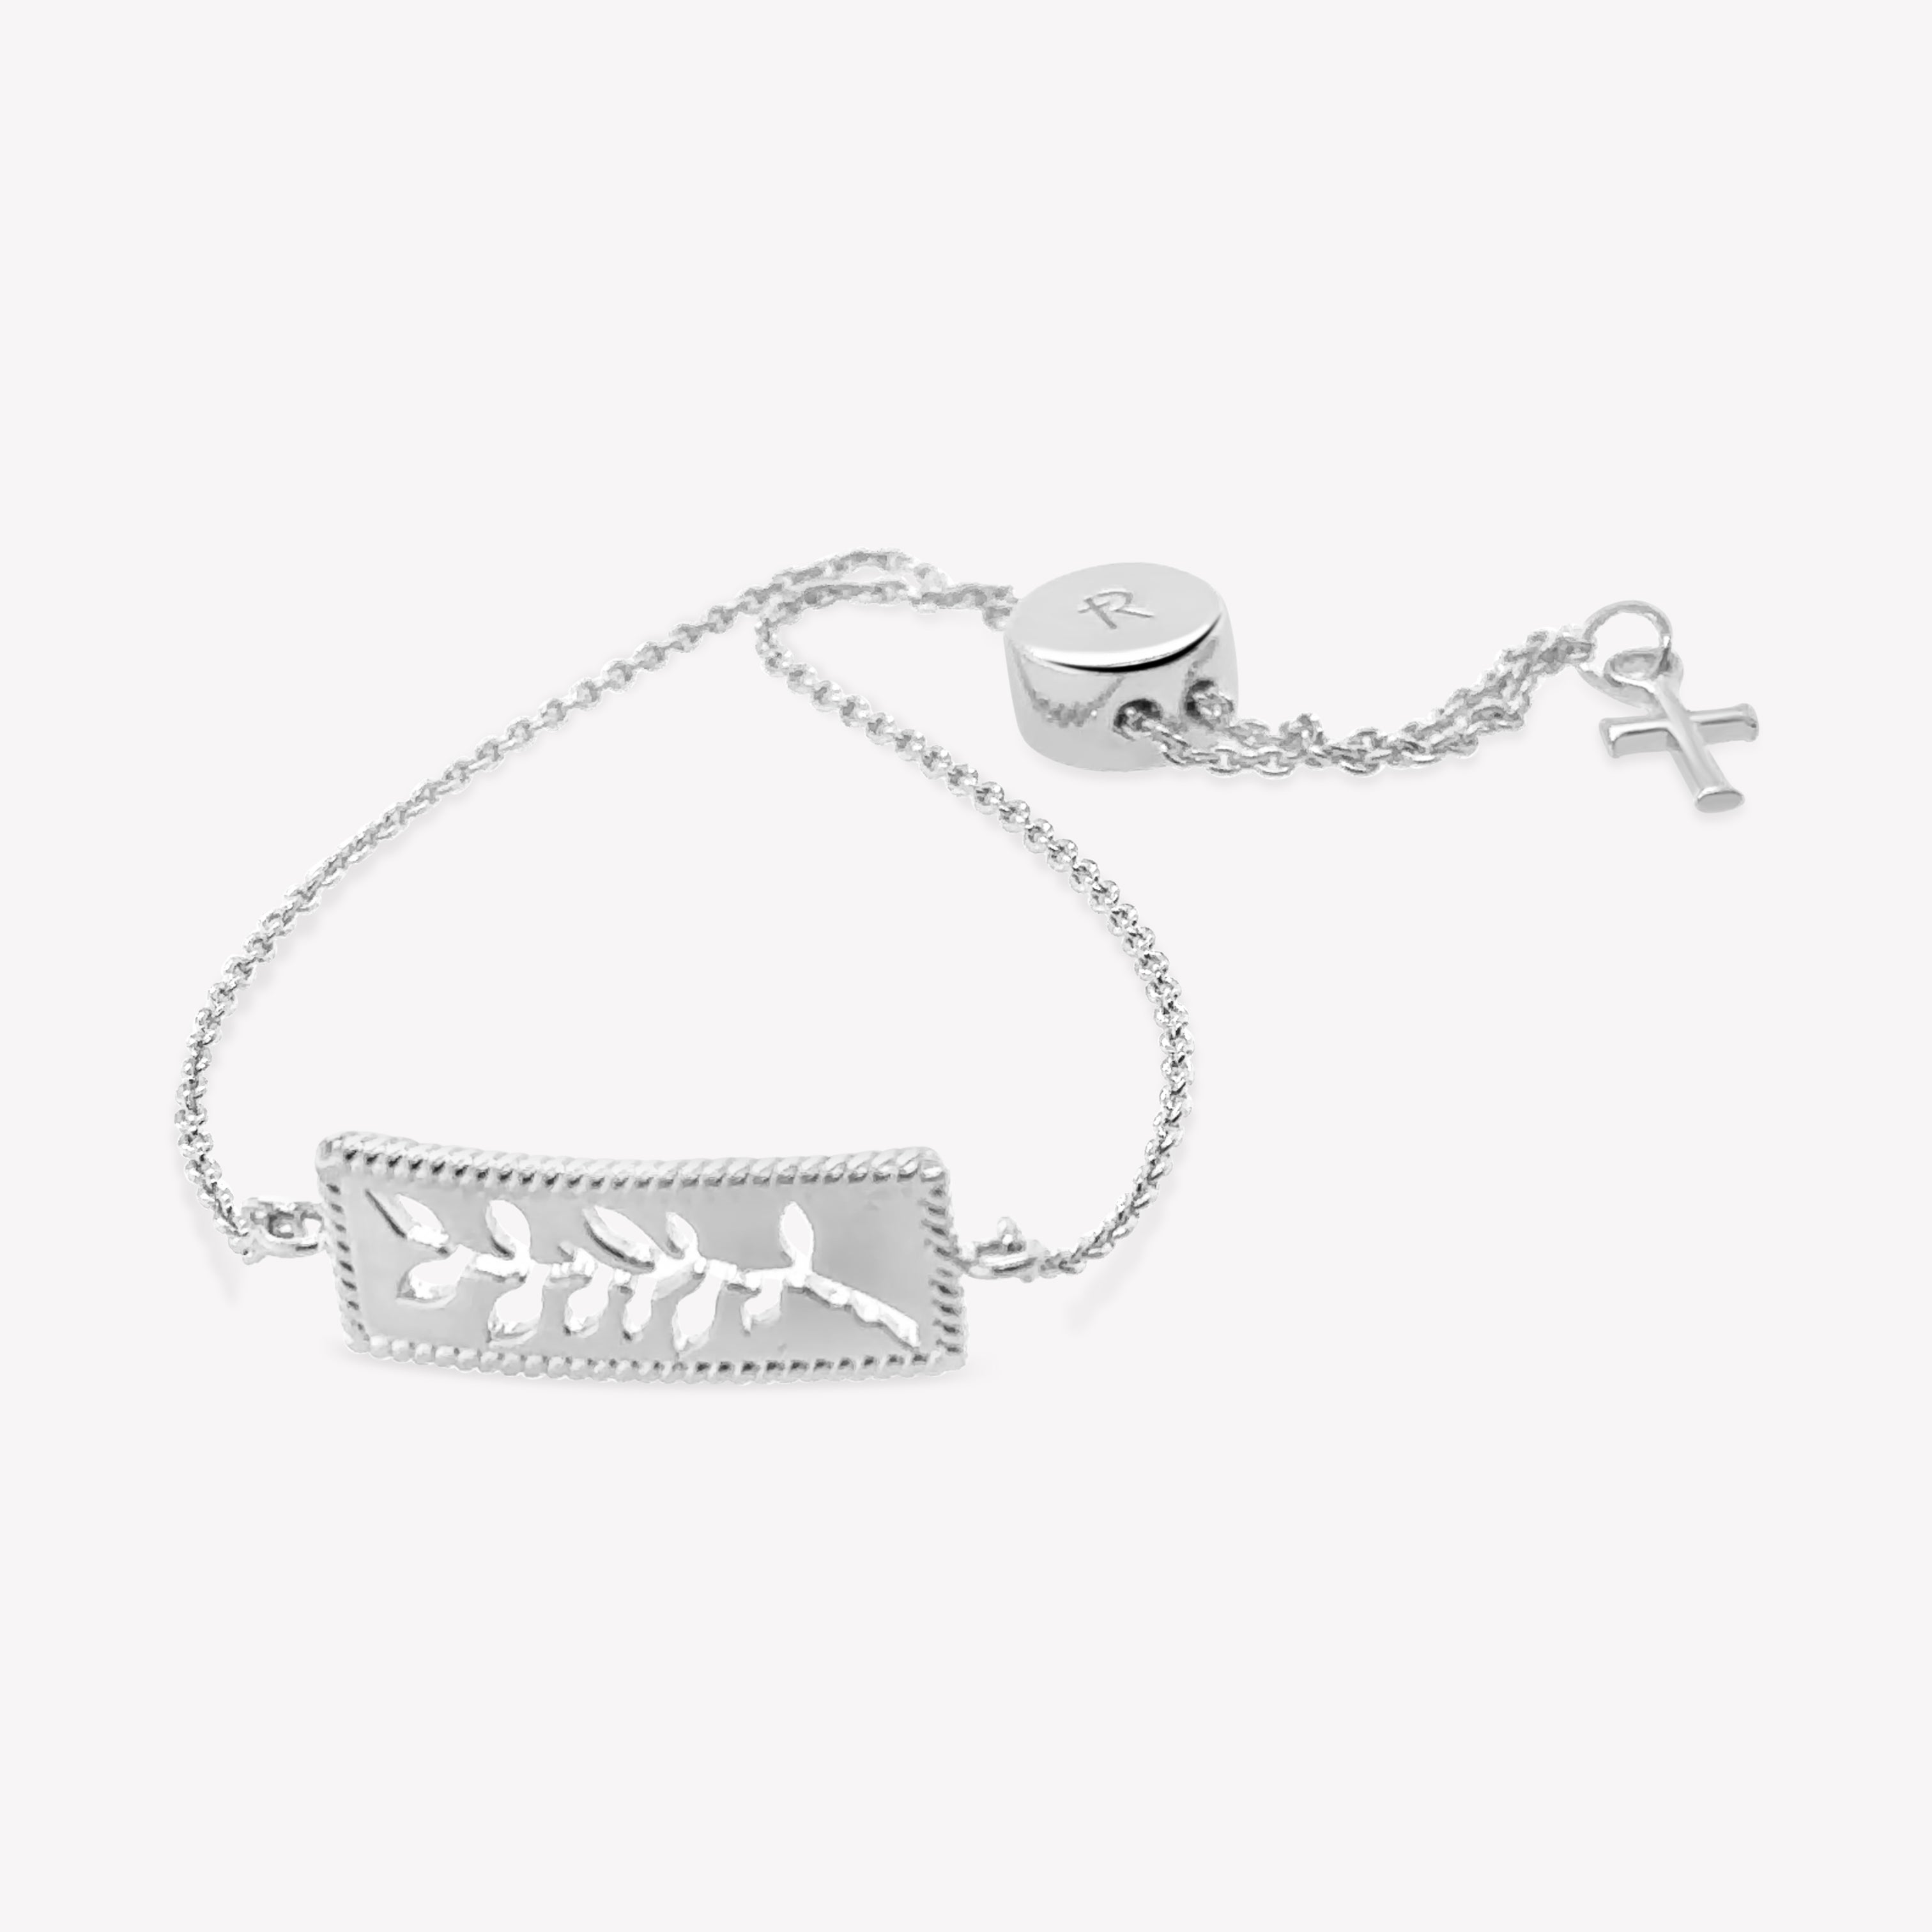 Intricately designed sterling silver Olive Branch Bracelet with cross tag from the Rooted Collection by Rizen Jewelry.